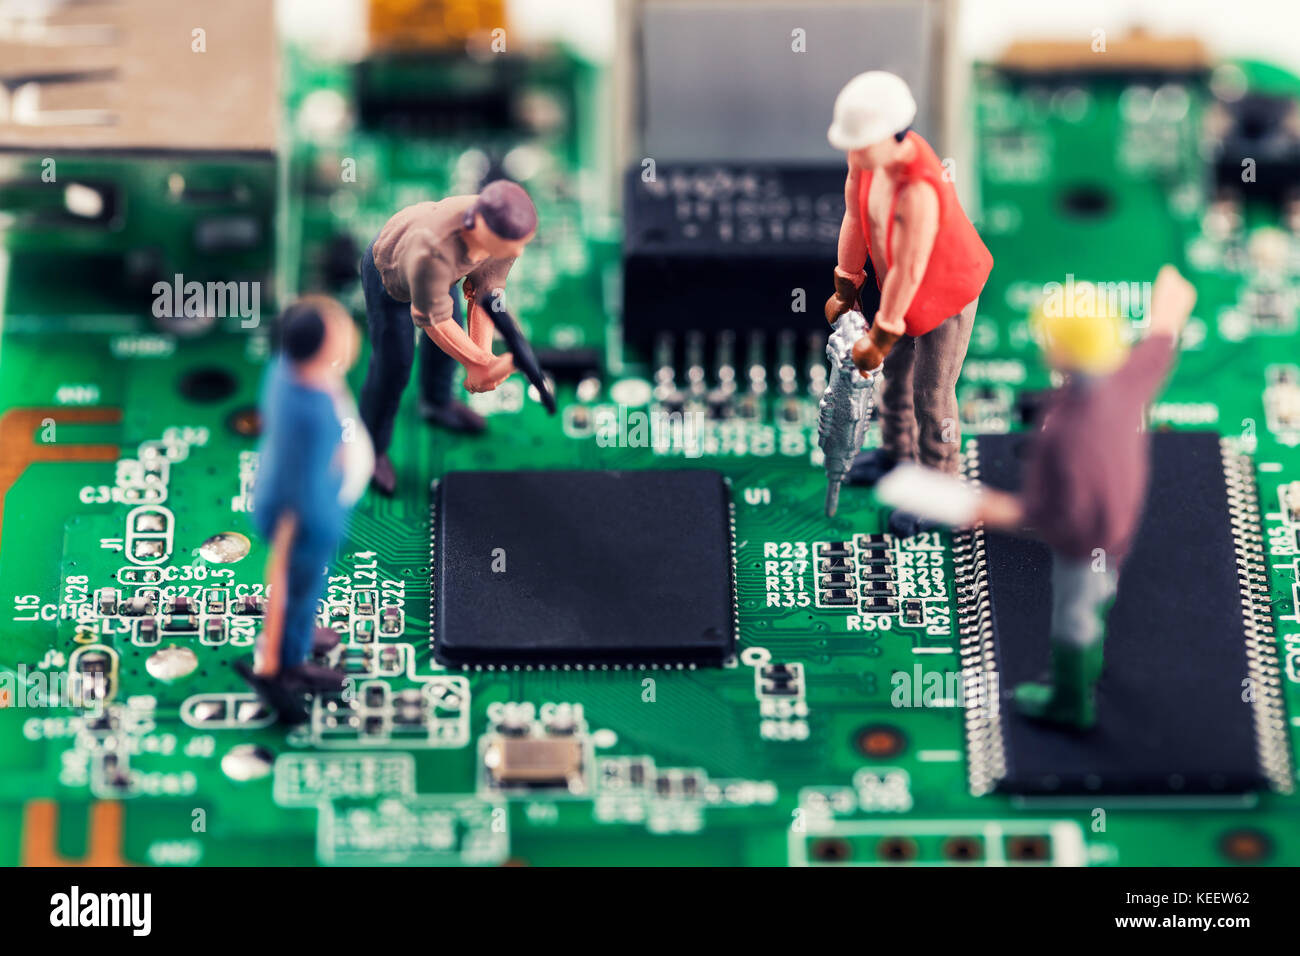 electronics repair and tech support concept - workers repairing circuit board Stock Photo